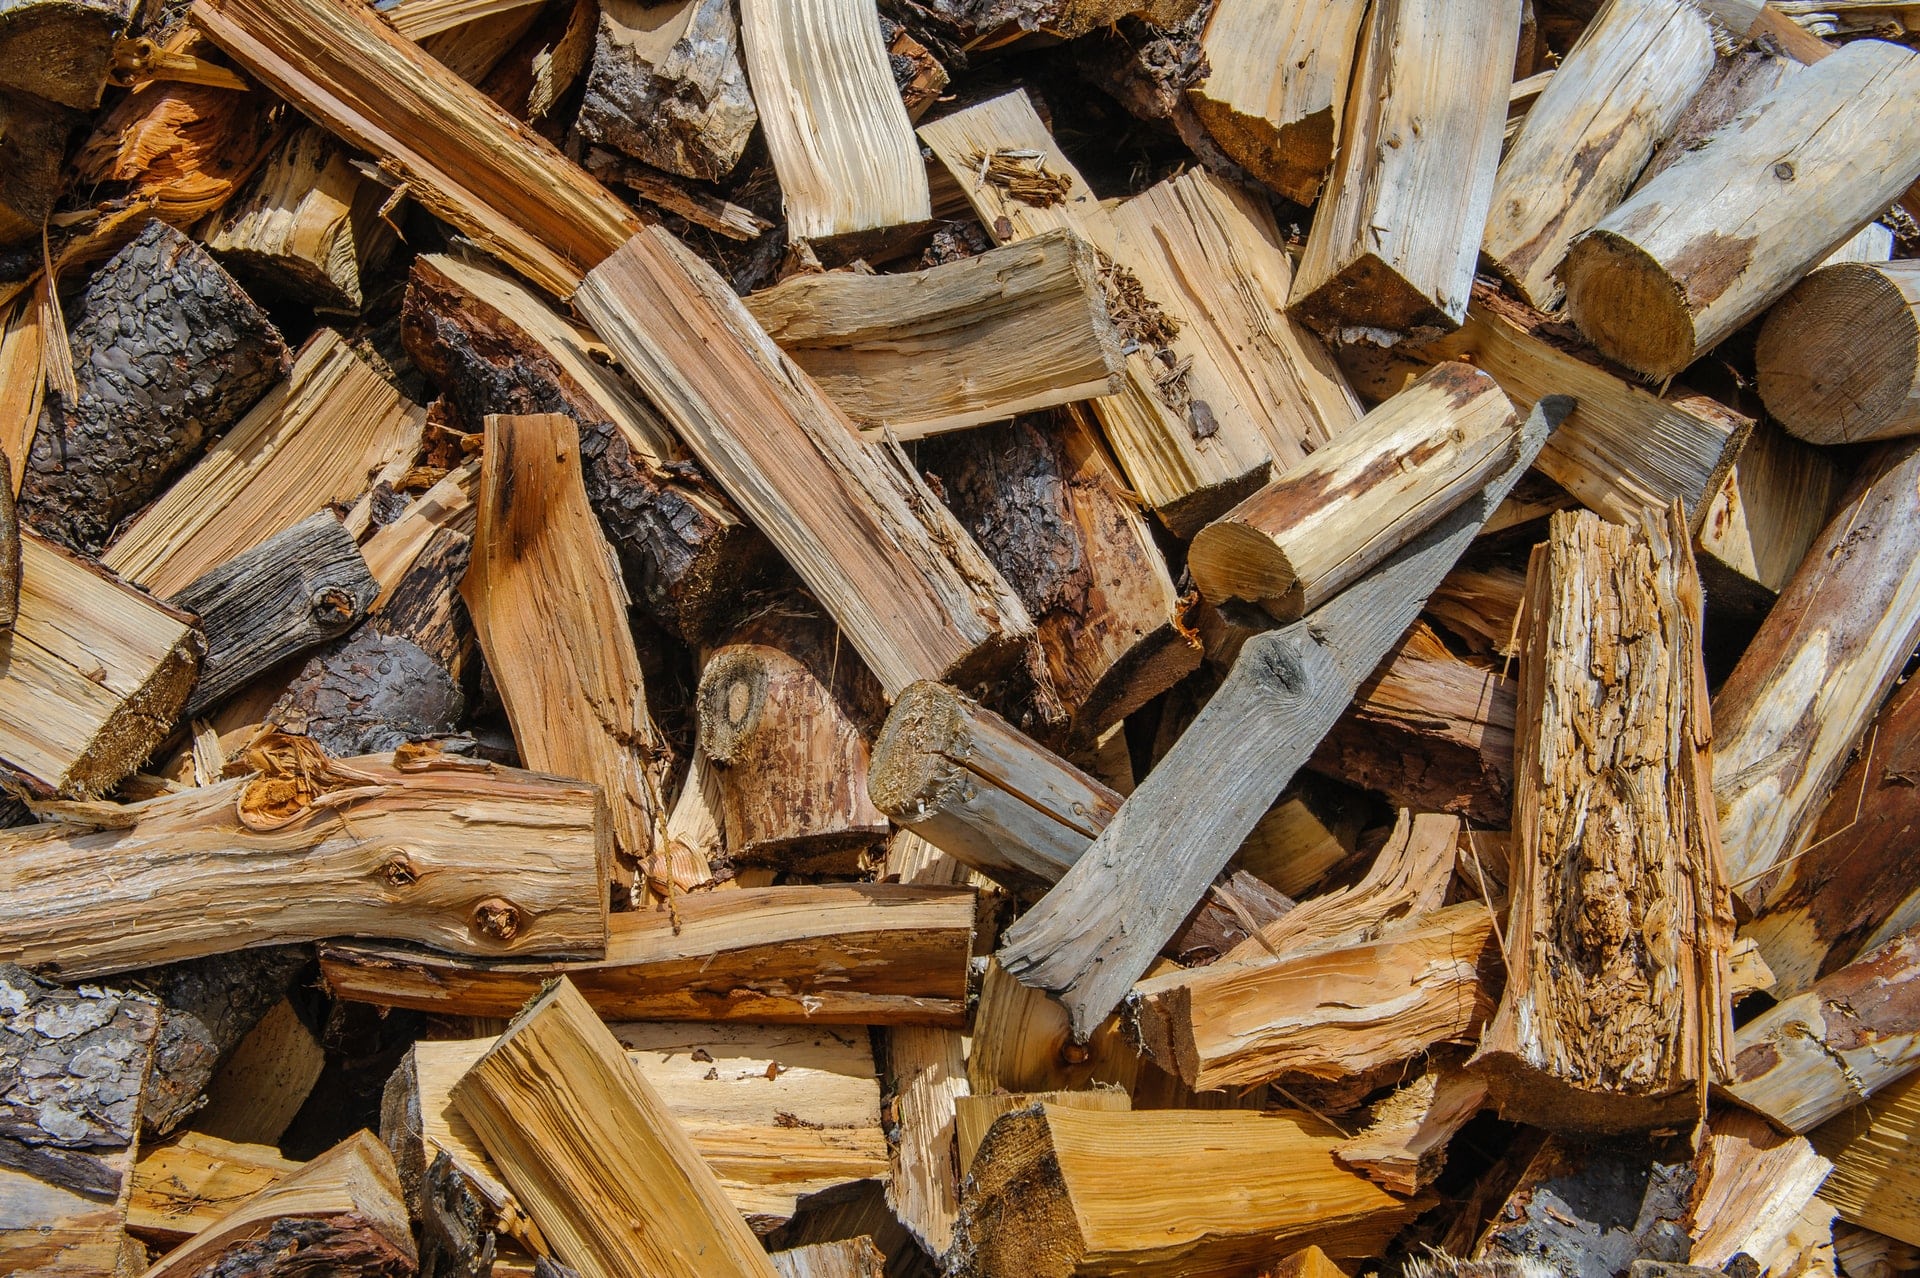 Top 4 Storage Options for Biomass Wood Fuel